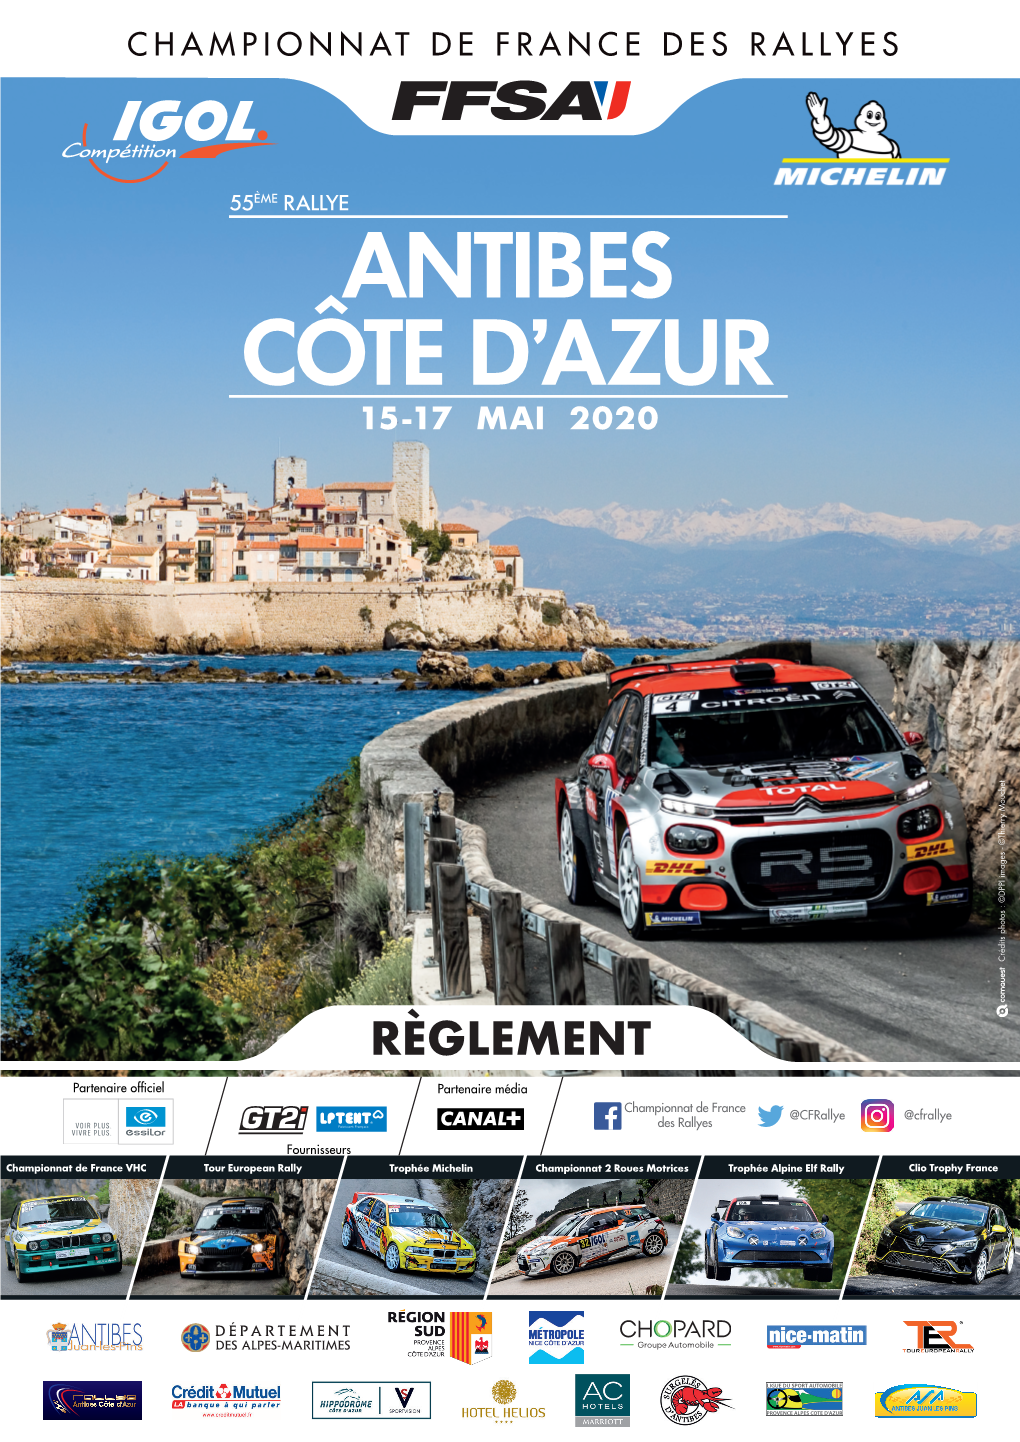 RALLYE ANTIBES CÔTE D'azur" Is Not to Be Any More Demonstrated